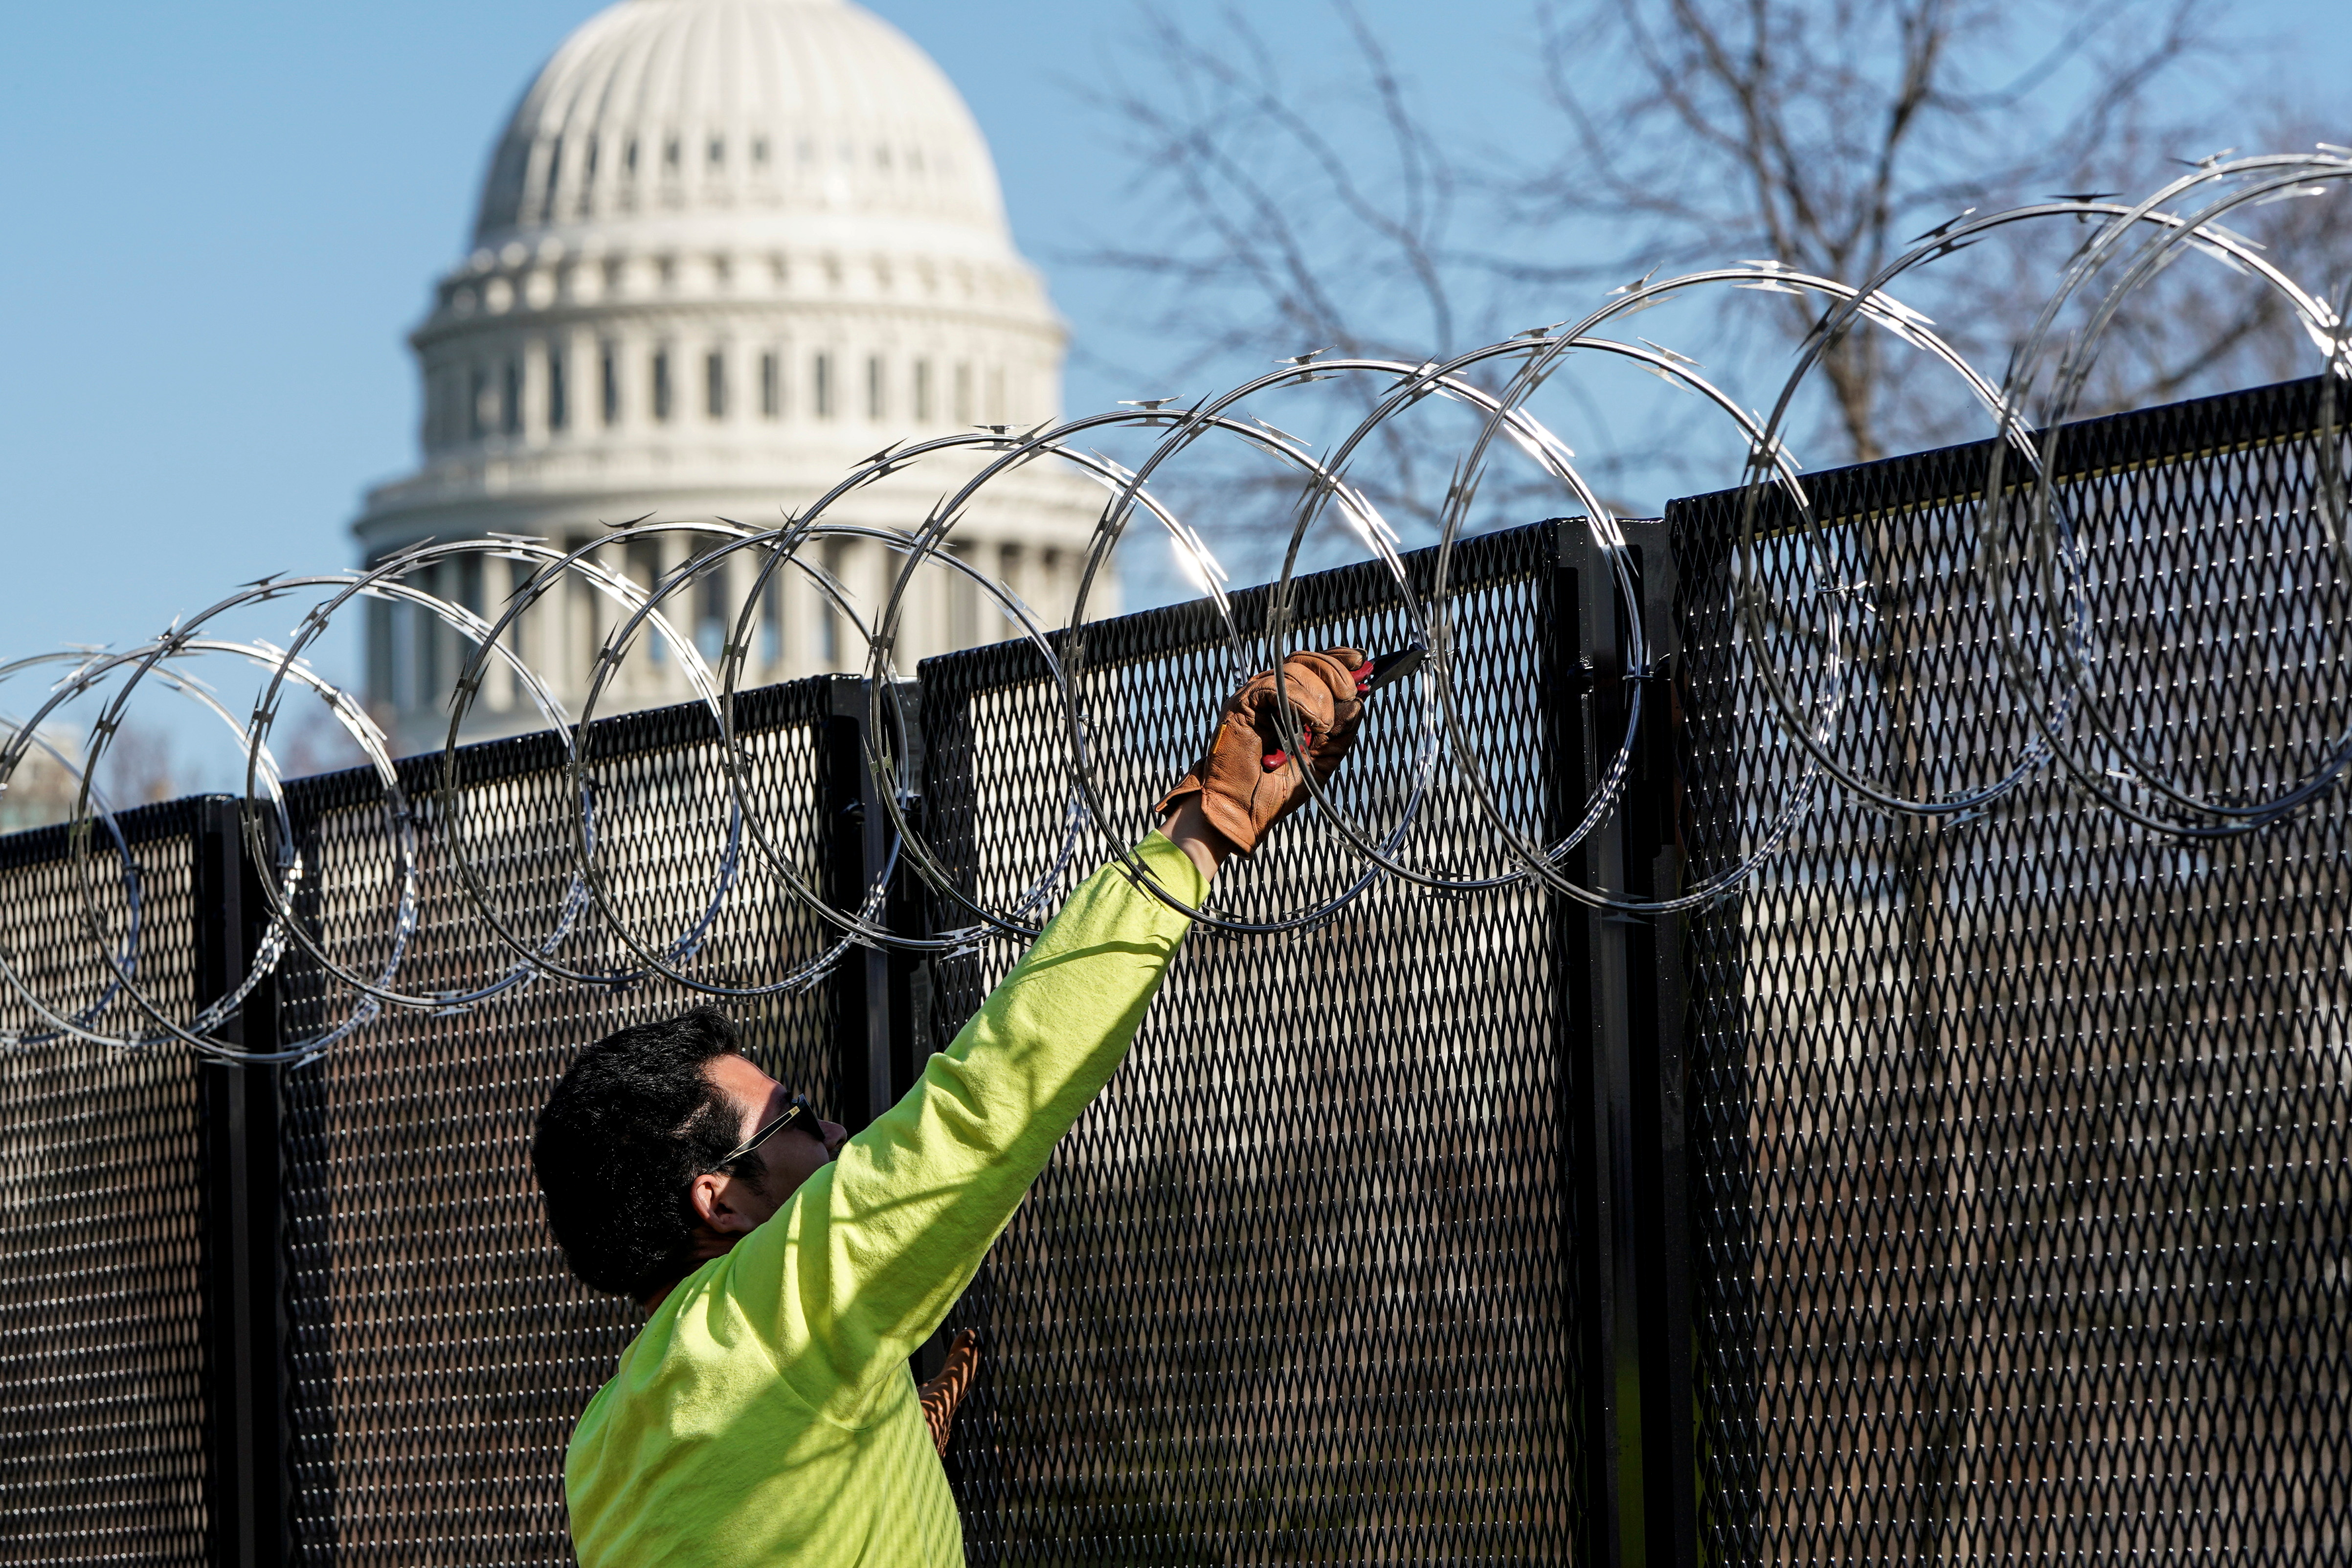 A worker removes razor wire from the top of security fencing as part of a reduction in heightened security measures taken after the January 6th attack on the U.S. Capitol in Washington, U.S., March 20, 2021.      REUTERS/Joshua Roberts/File Photo